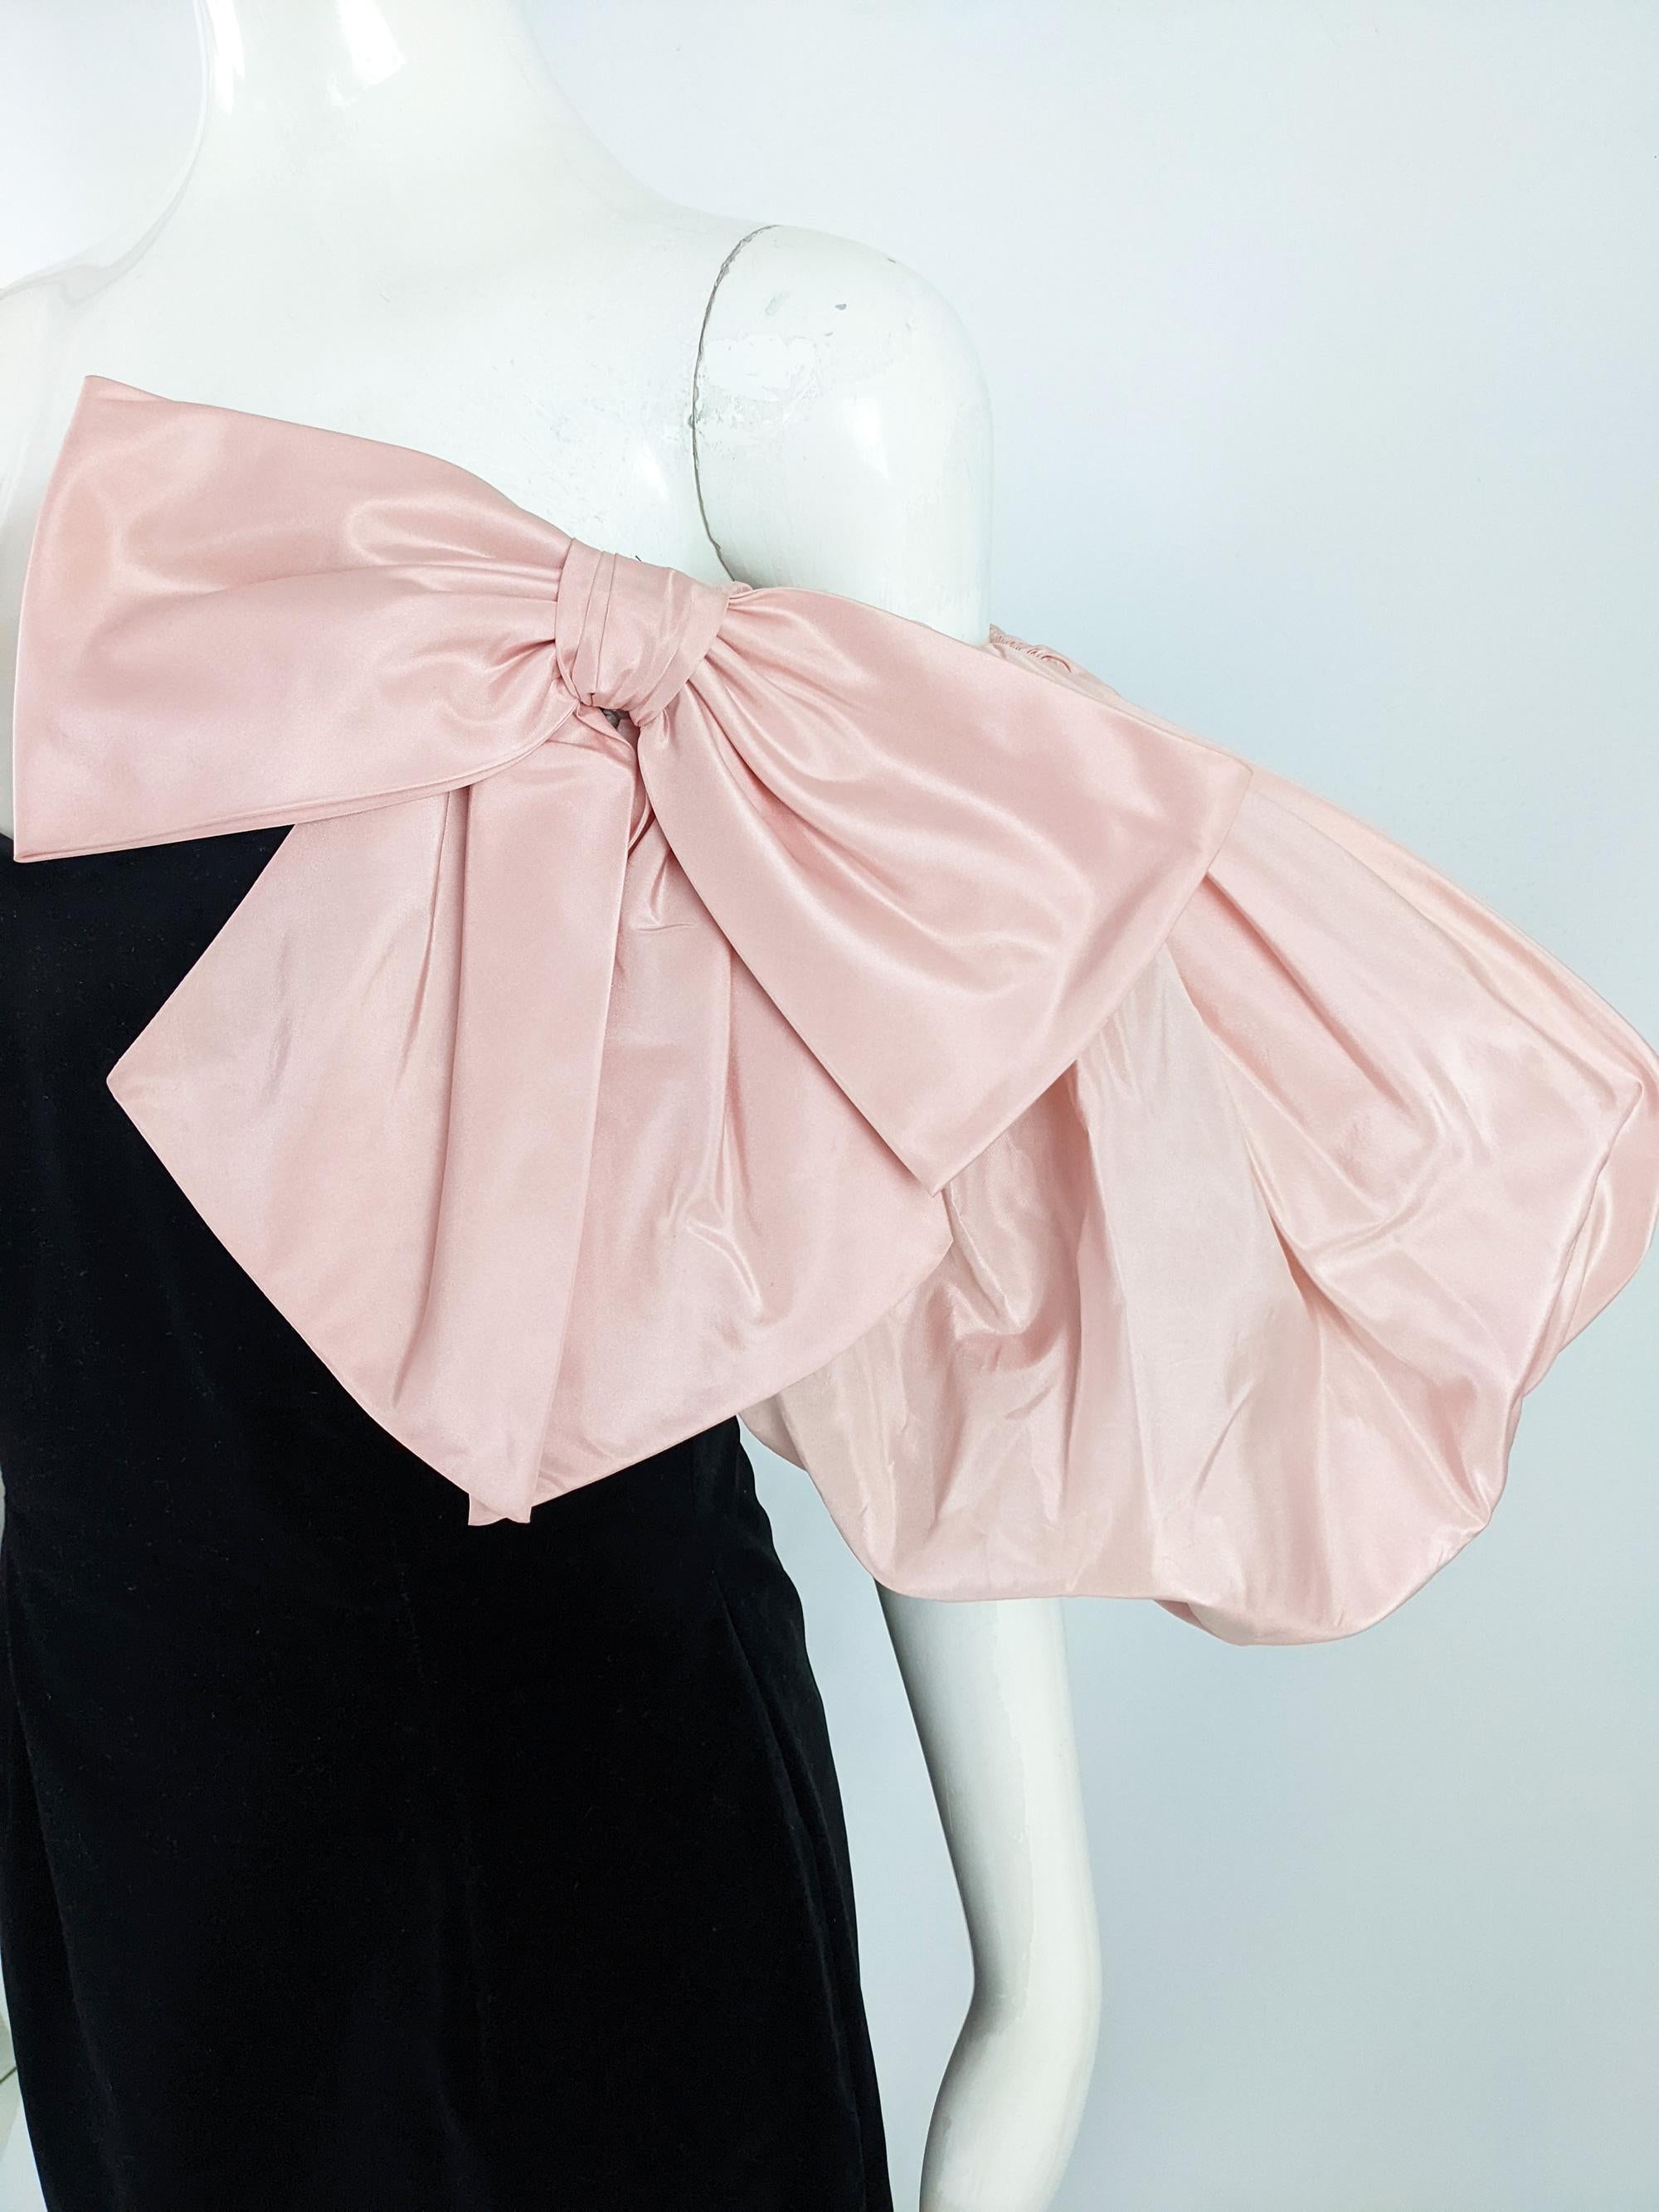 Gina Fratini Vintage Velvet & Pink Silk Taffeta Puff Sleeve Party Evening Dress In Excellent Condition For Sale In Doncaster, South Yorkshire